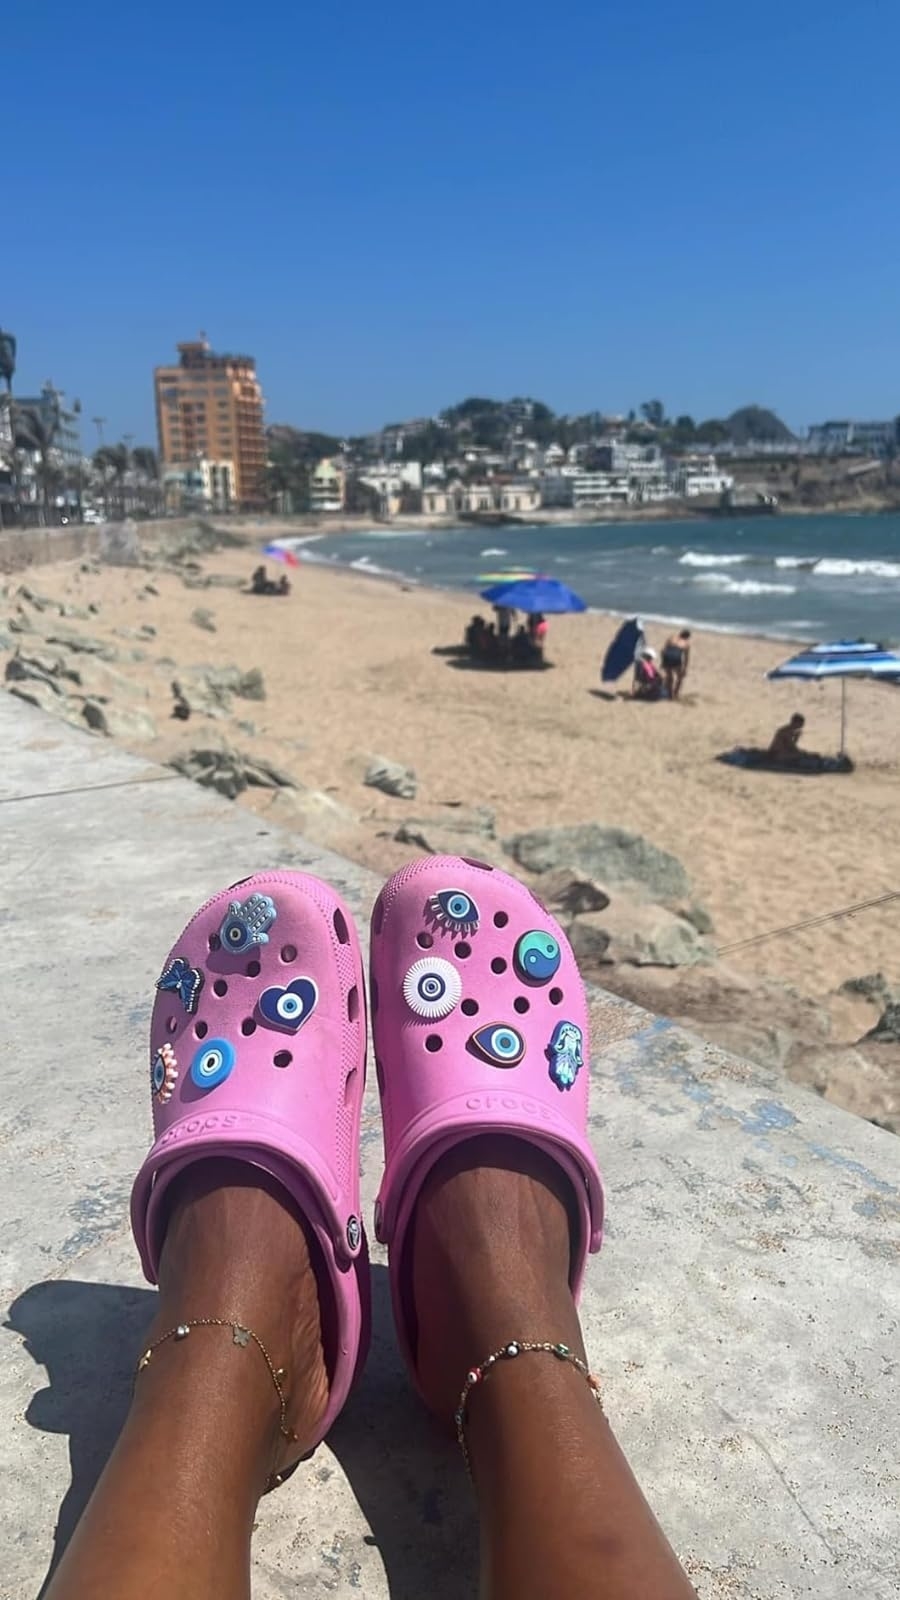 Person wearing embellished pink crocs by the beach